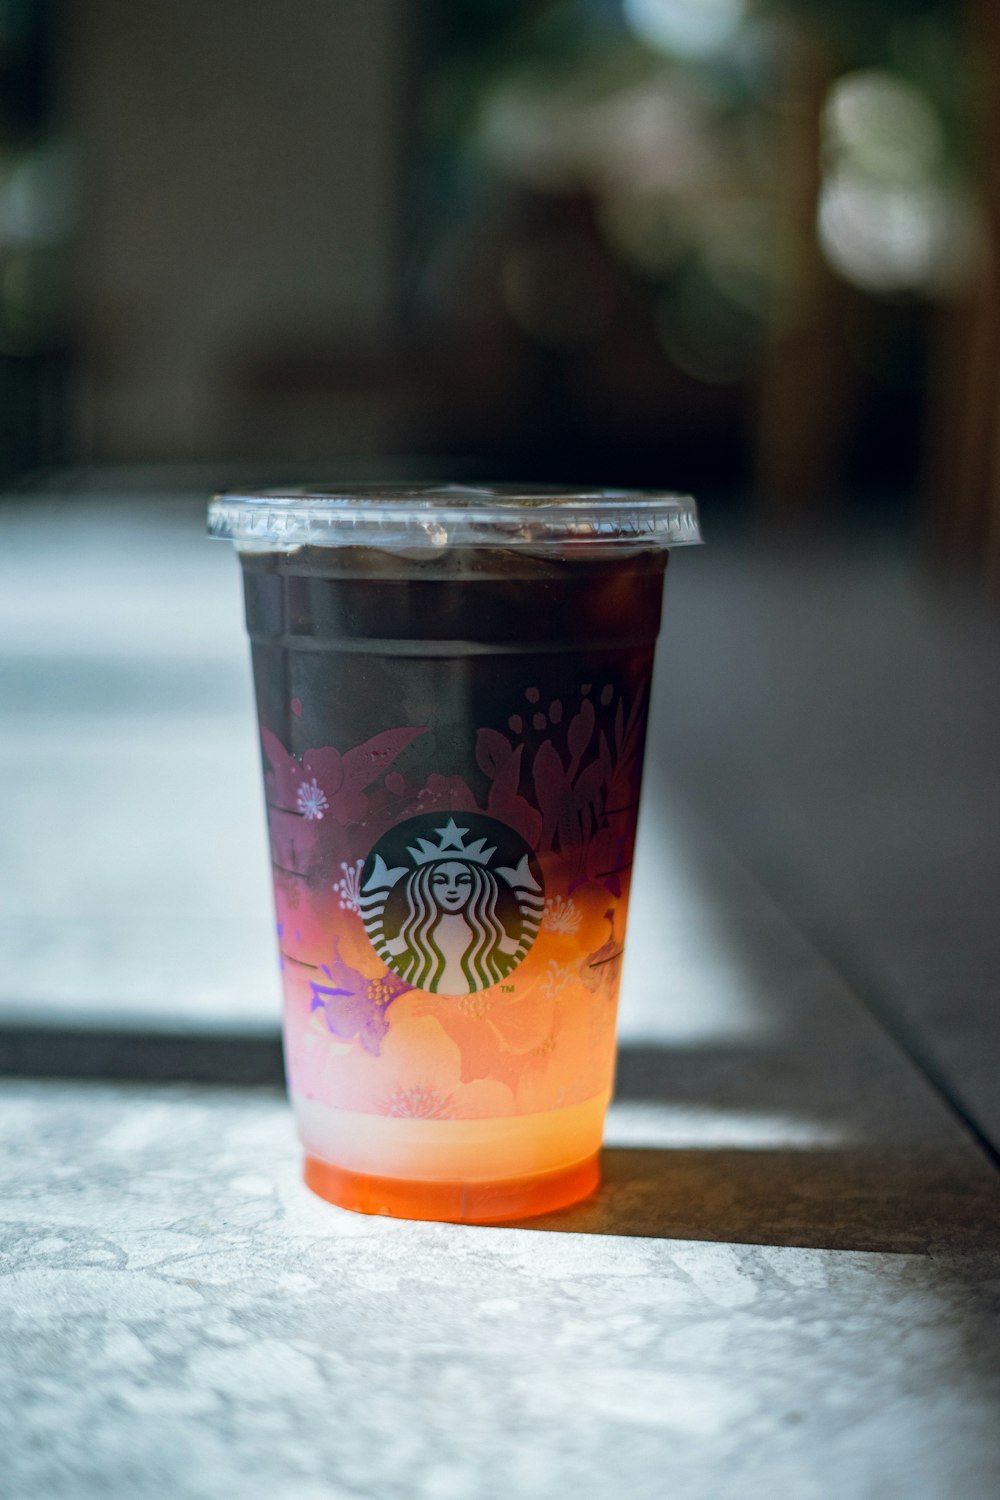 Starbucks disposable cup